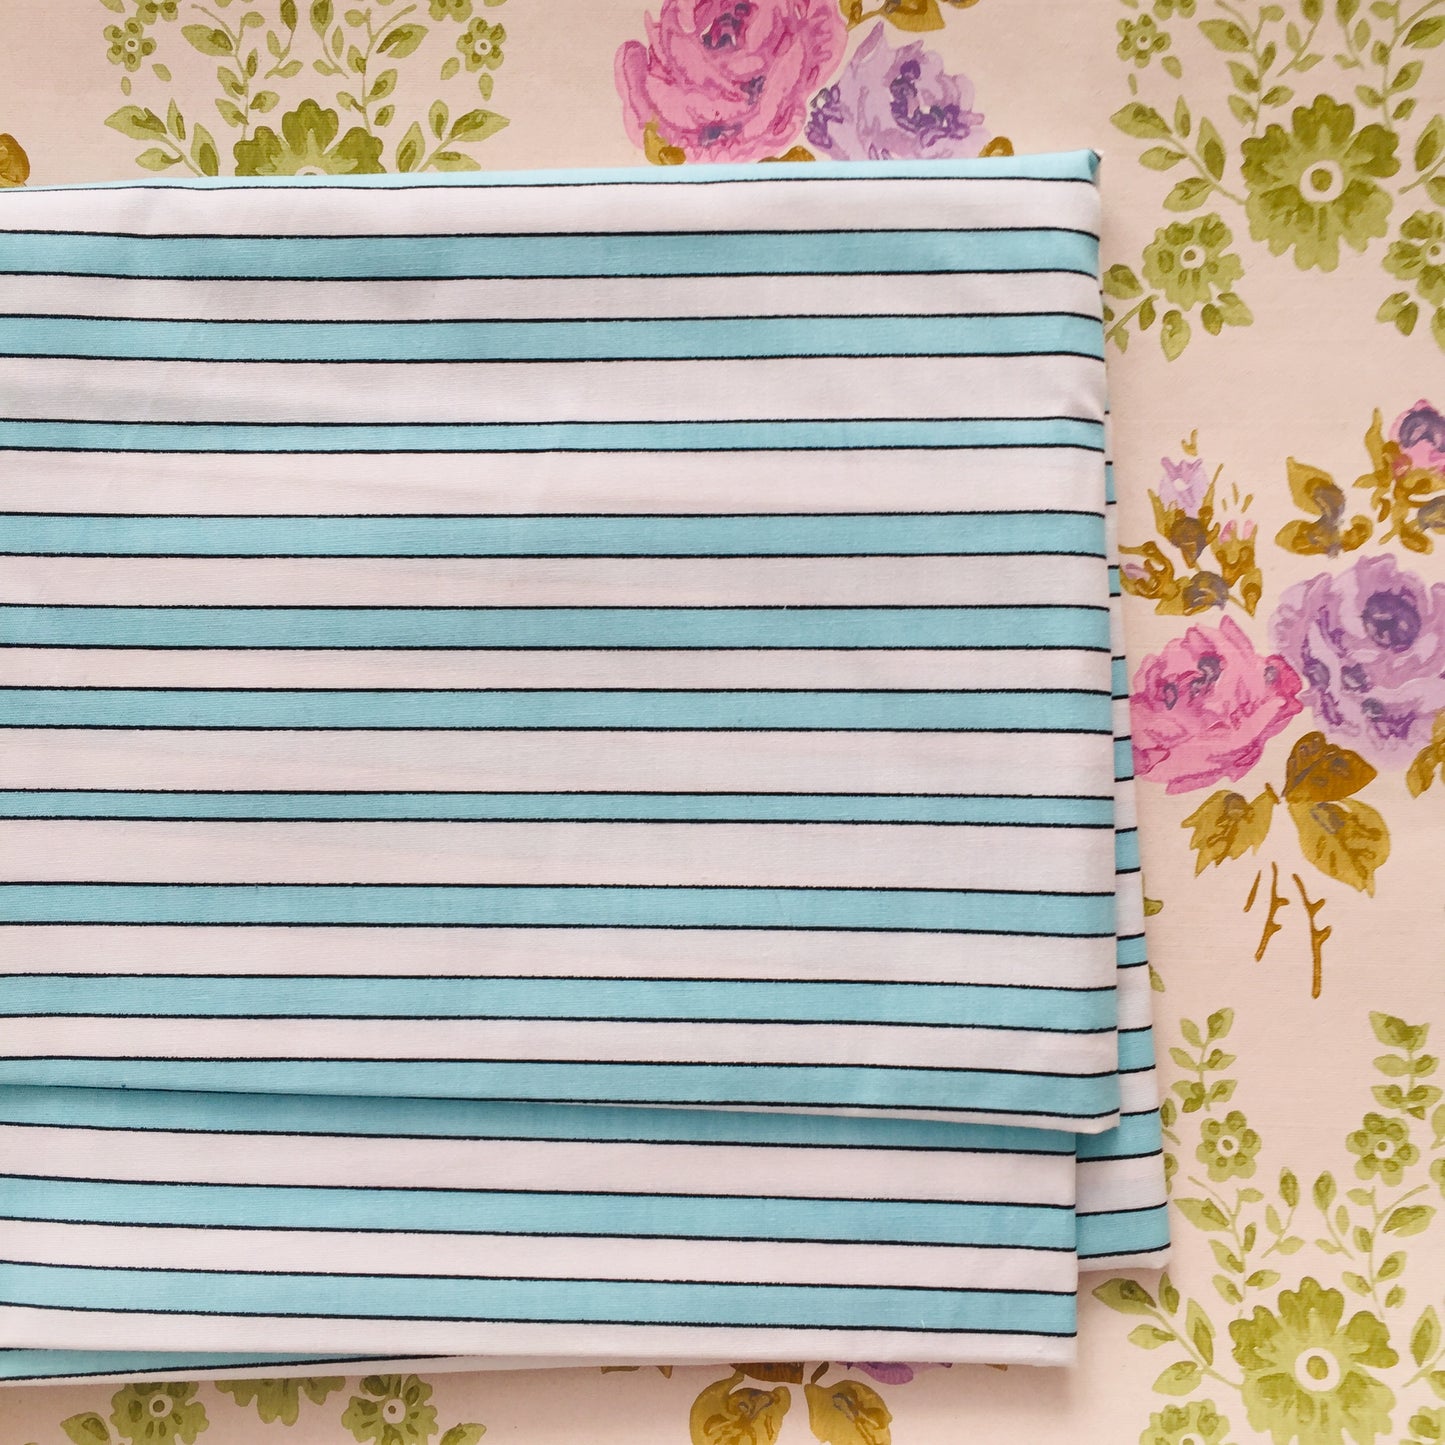 All Cotton Vintage Candy Striped Pillow Cases PAIR